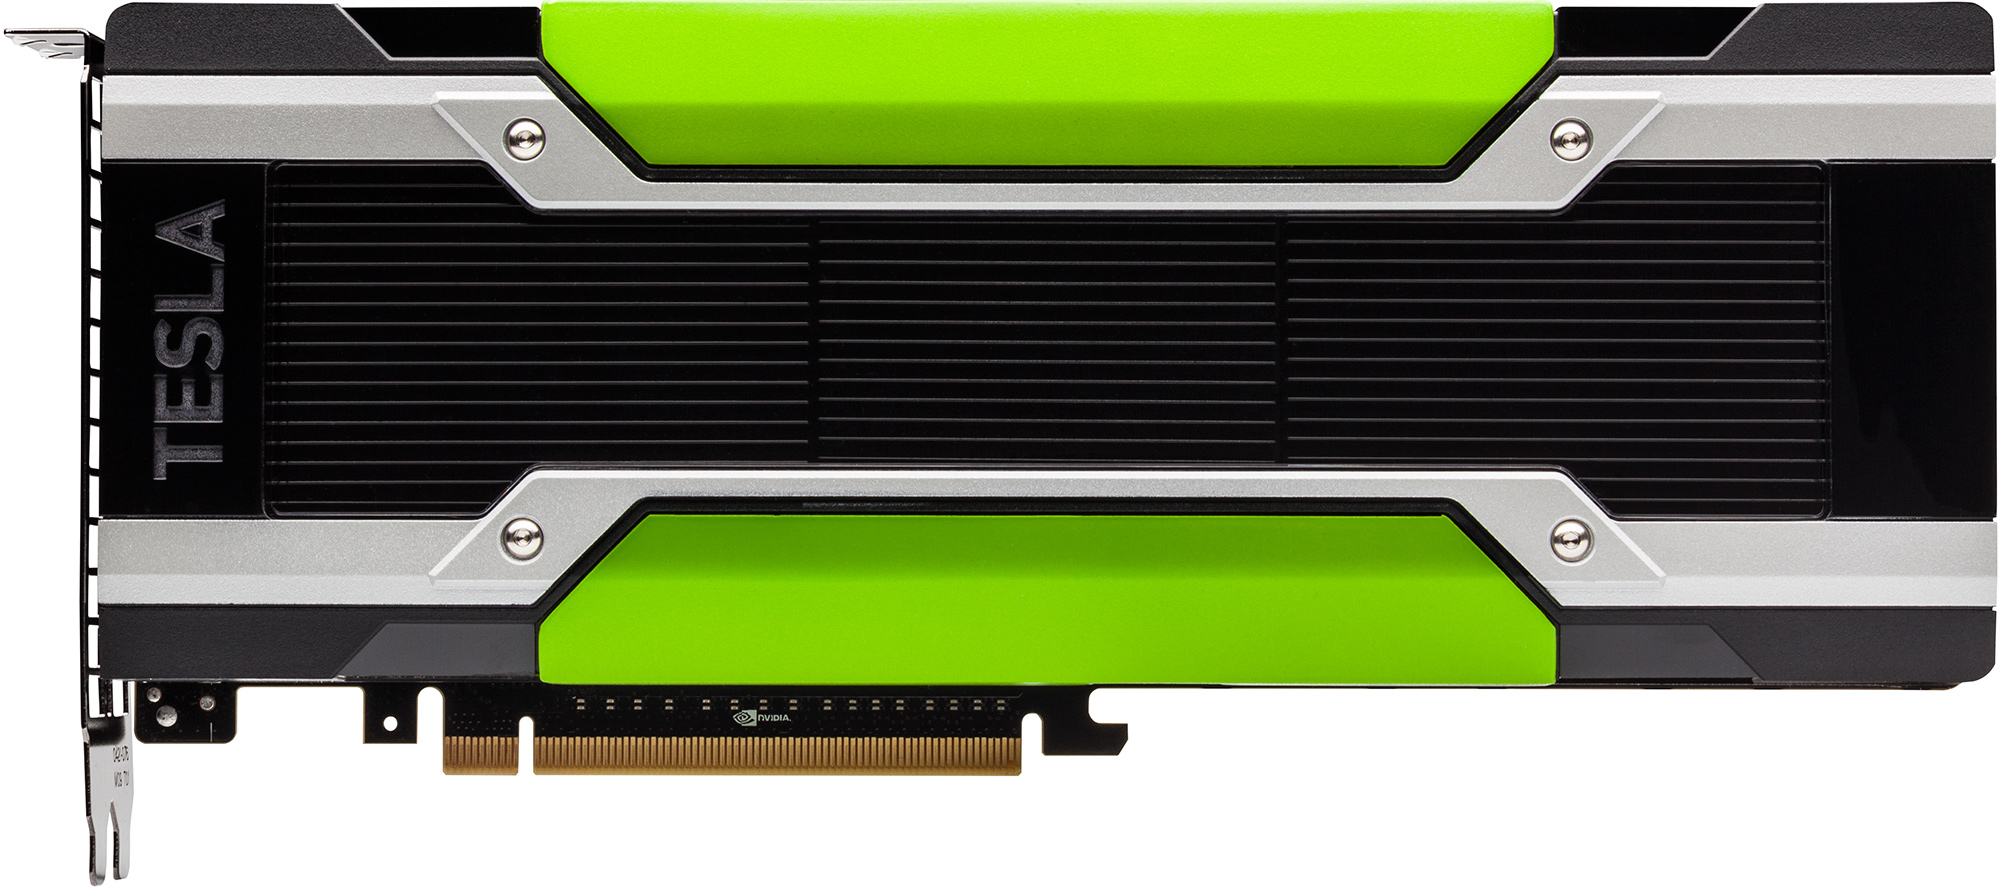 nvidia is developing new maxwell based quadro tesla cards